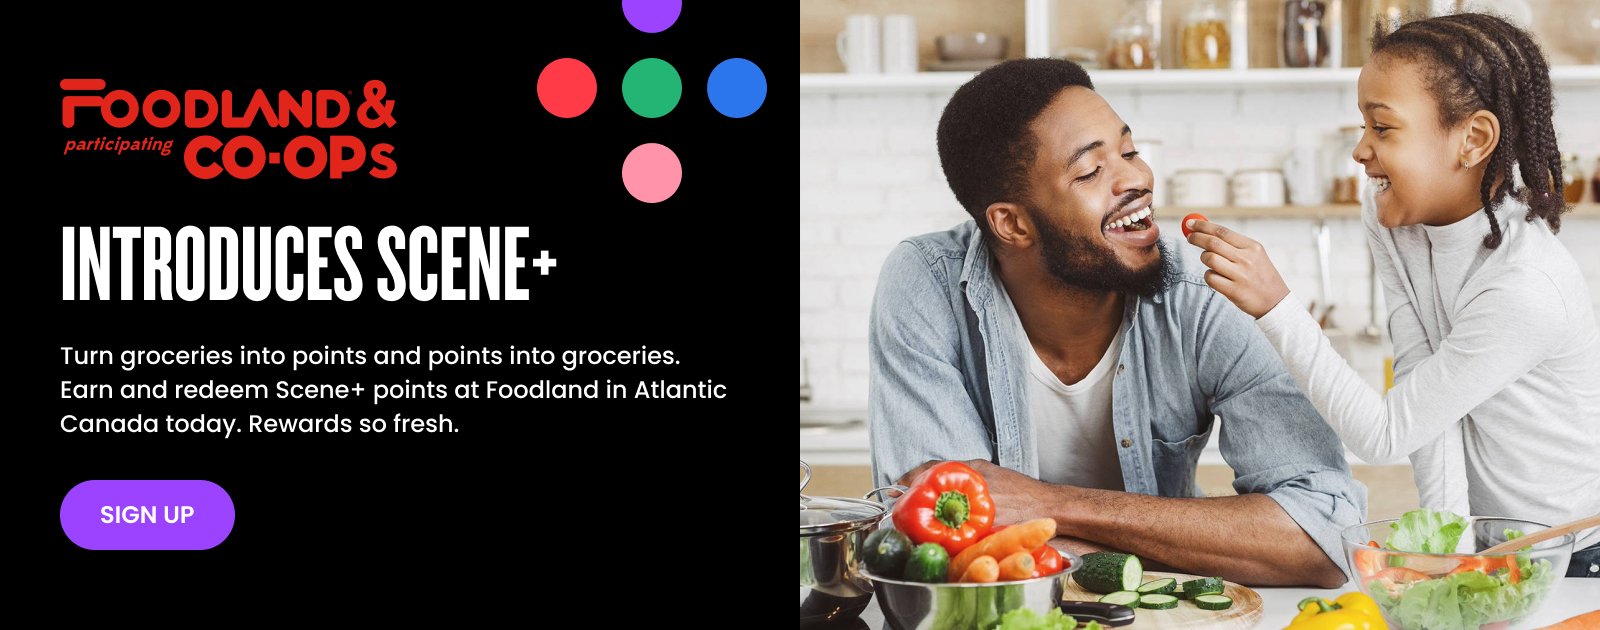 Text Reading 'Foodland & participating Co-ops introduces Scene+ Turn purchases into points and points into purchases. Earn and redeem Scene+ points at Foodland today. Rewards so fresh. Press 'Sign Up' button to avail benefits on ELM'.